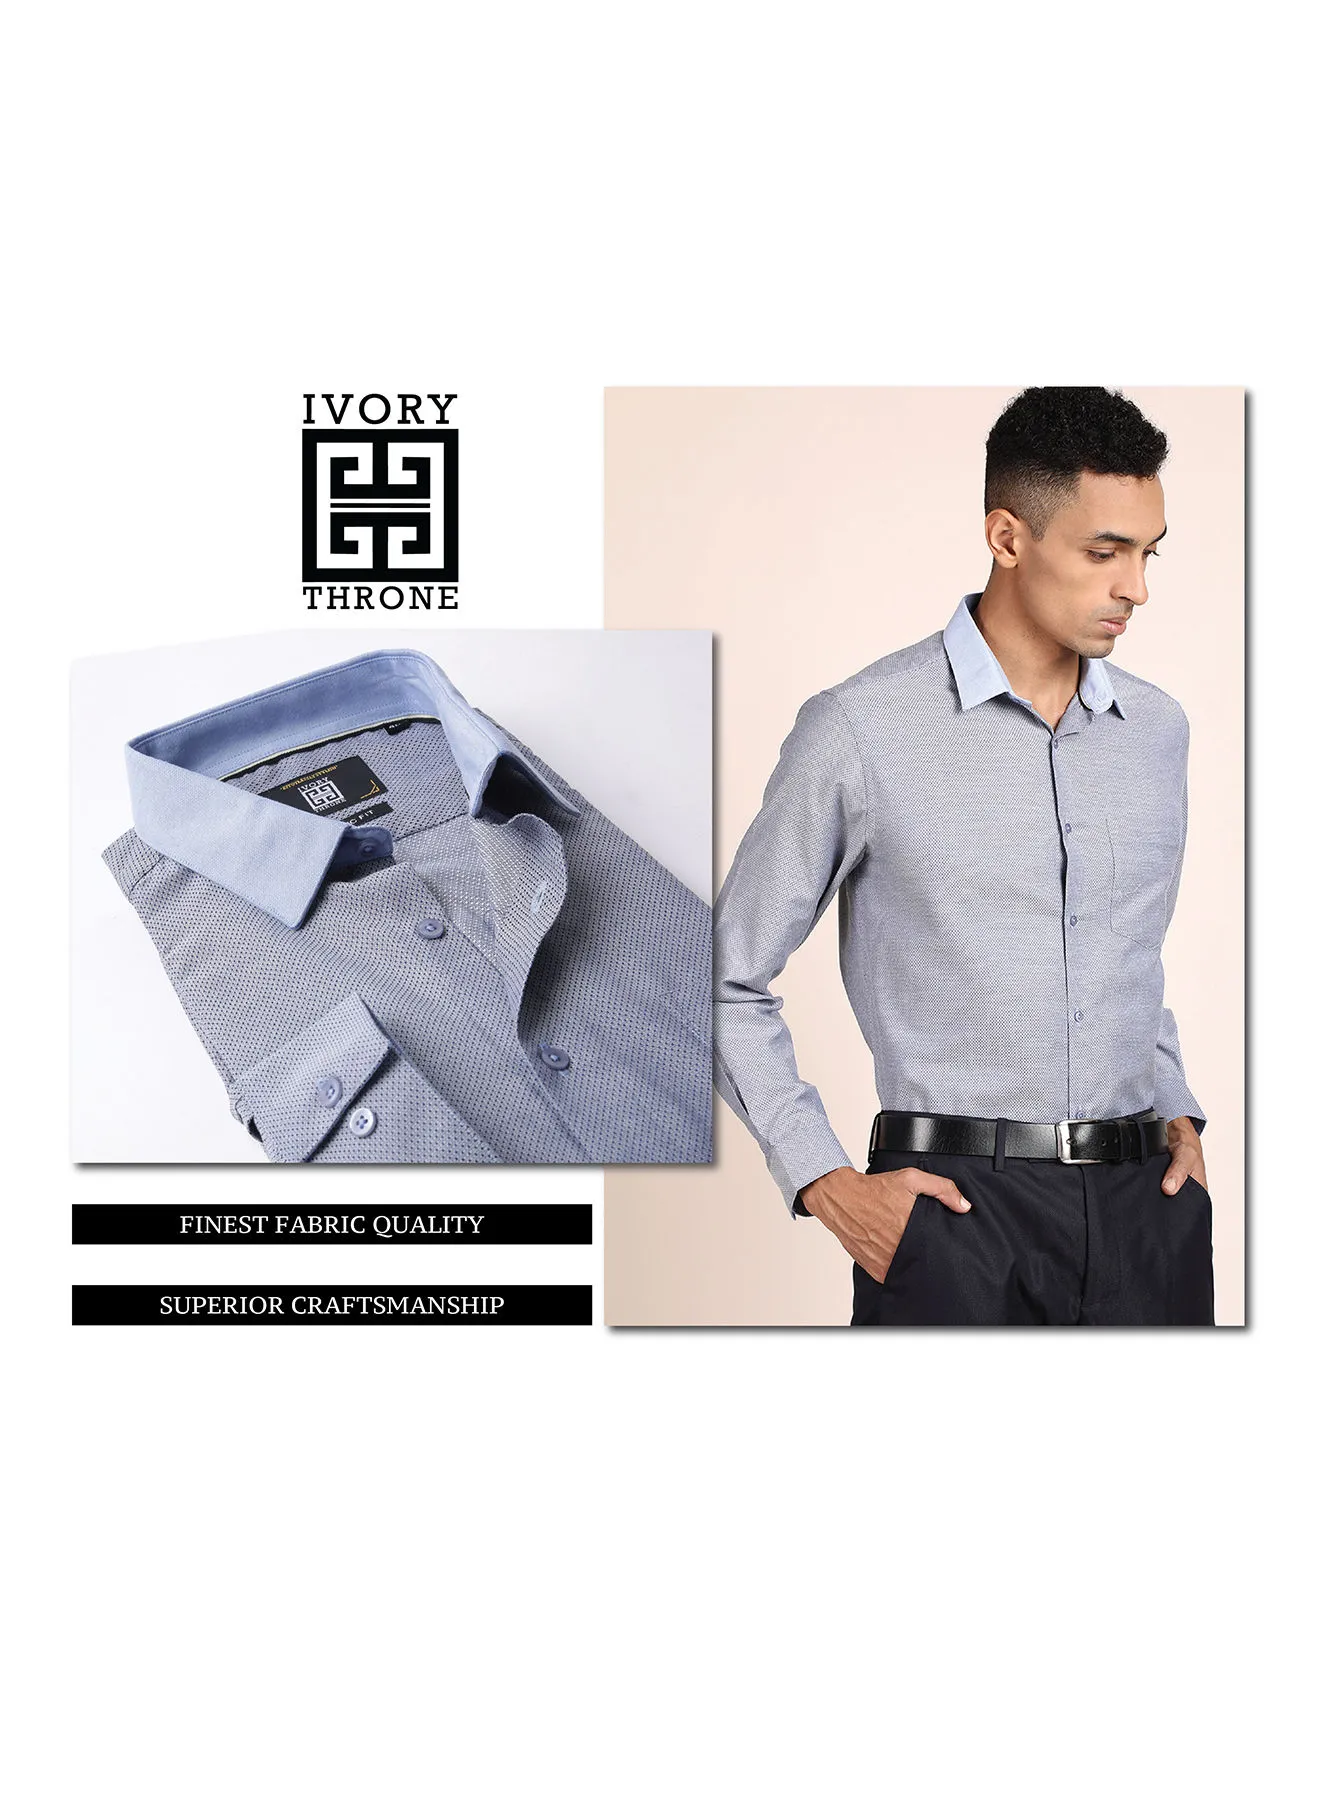 Ivory Throne Classic Point Collared Formal Shirt Light Blue